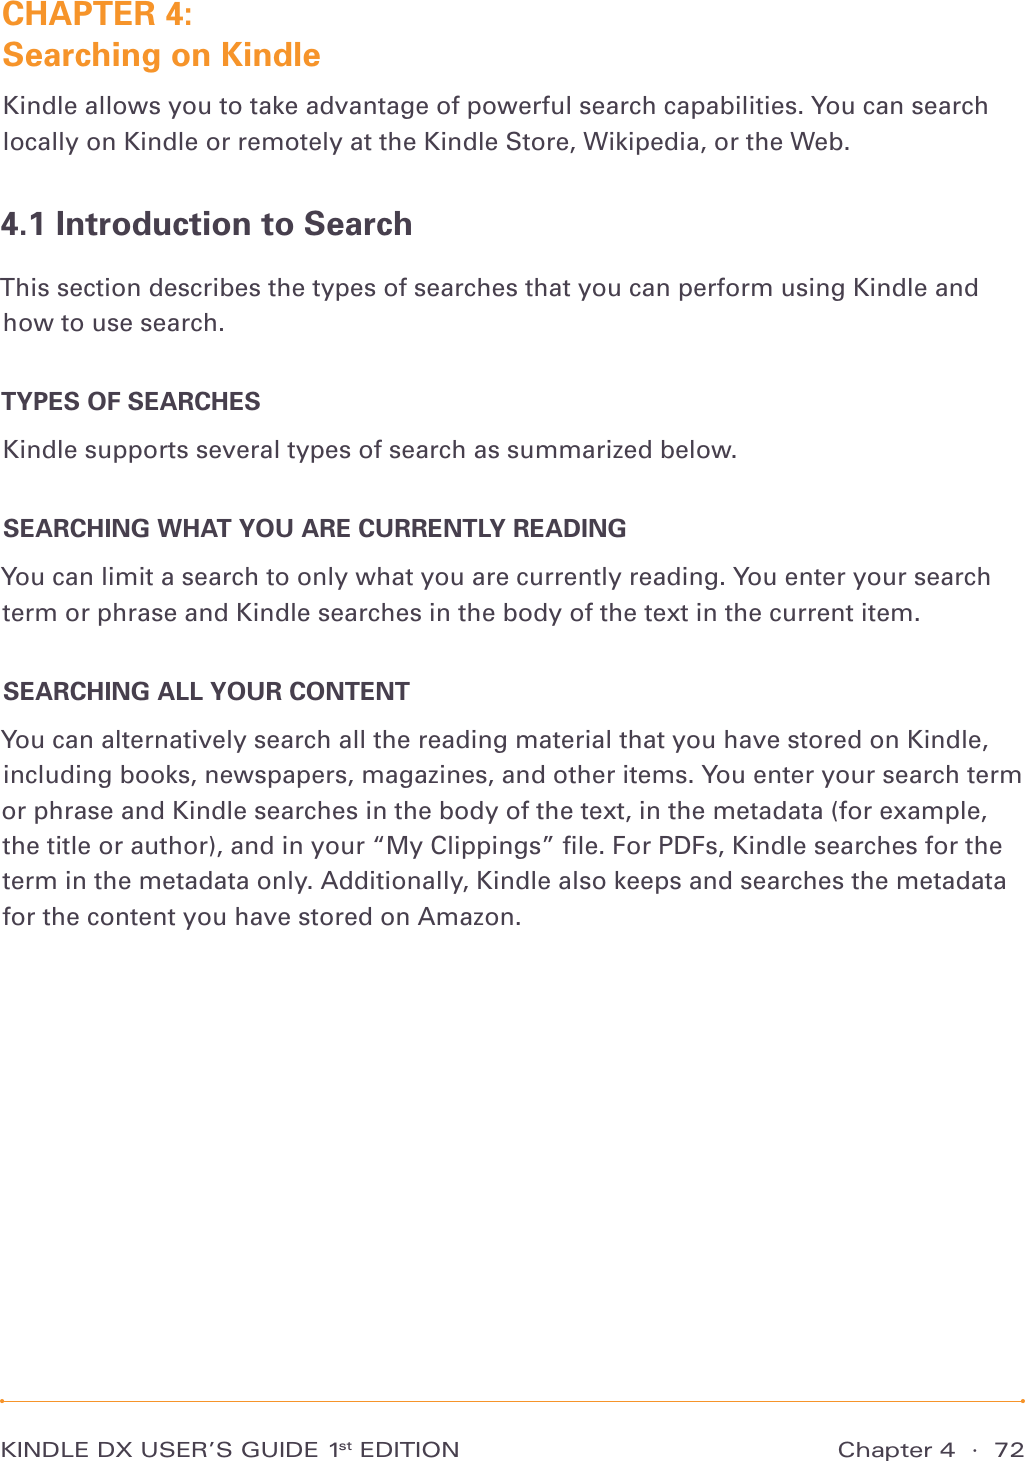 Chapter 4  ·  72KINDLE DX USER’S GUIDE 1st EDITIONCHAPTER 4:  Searching on KindleKindle allows you to take advantage of powerful search capabilities. You can search locally on Kindle or remotely at the Kindle Store, Wikipedia, or the Web.4.1 Introduction to SearchThis section describes the types of searches that you can perform using Kindle and how to use search.TYPES OF SEARCHESKindle supports several types of search as summarized below.SEARCHING WHAT YOU ARE CURRENTLY READINGYou can limit a search to only what you are currently reading. You enter your search term or phrase and Kindle searches in the body of the text in the current item.SEARCHING ALL YOUR CONTENTYou can alternatively search all the reading material that you have stored on Kindle, including books, newspapers, magazines, and other items. You enter your search term or phrase and Kindle searches in the body of the text, in the metadata (for example, the title or author), and in your “My Clippings” ﬁle. For PDFs, Kindle searches for the term in the metadata only. Additionally, Kindle also keeps and searches the metadata for the content you have stored on Amazon.